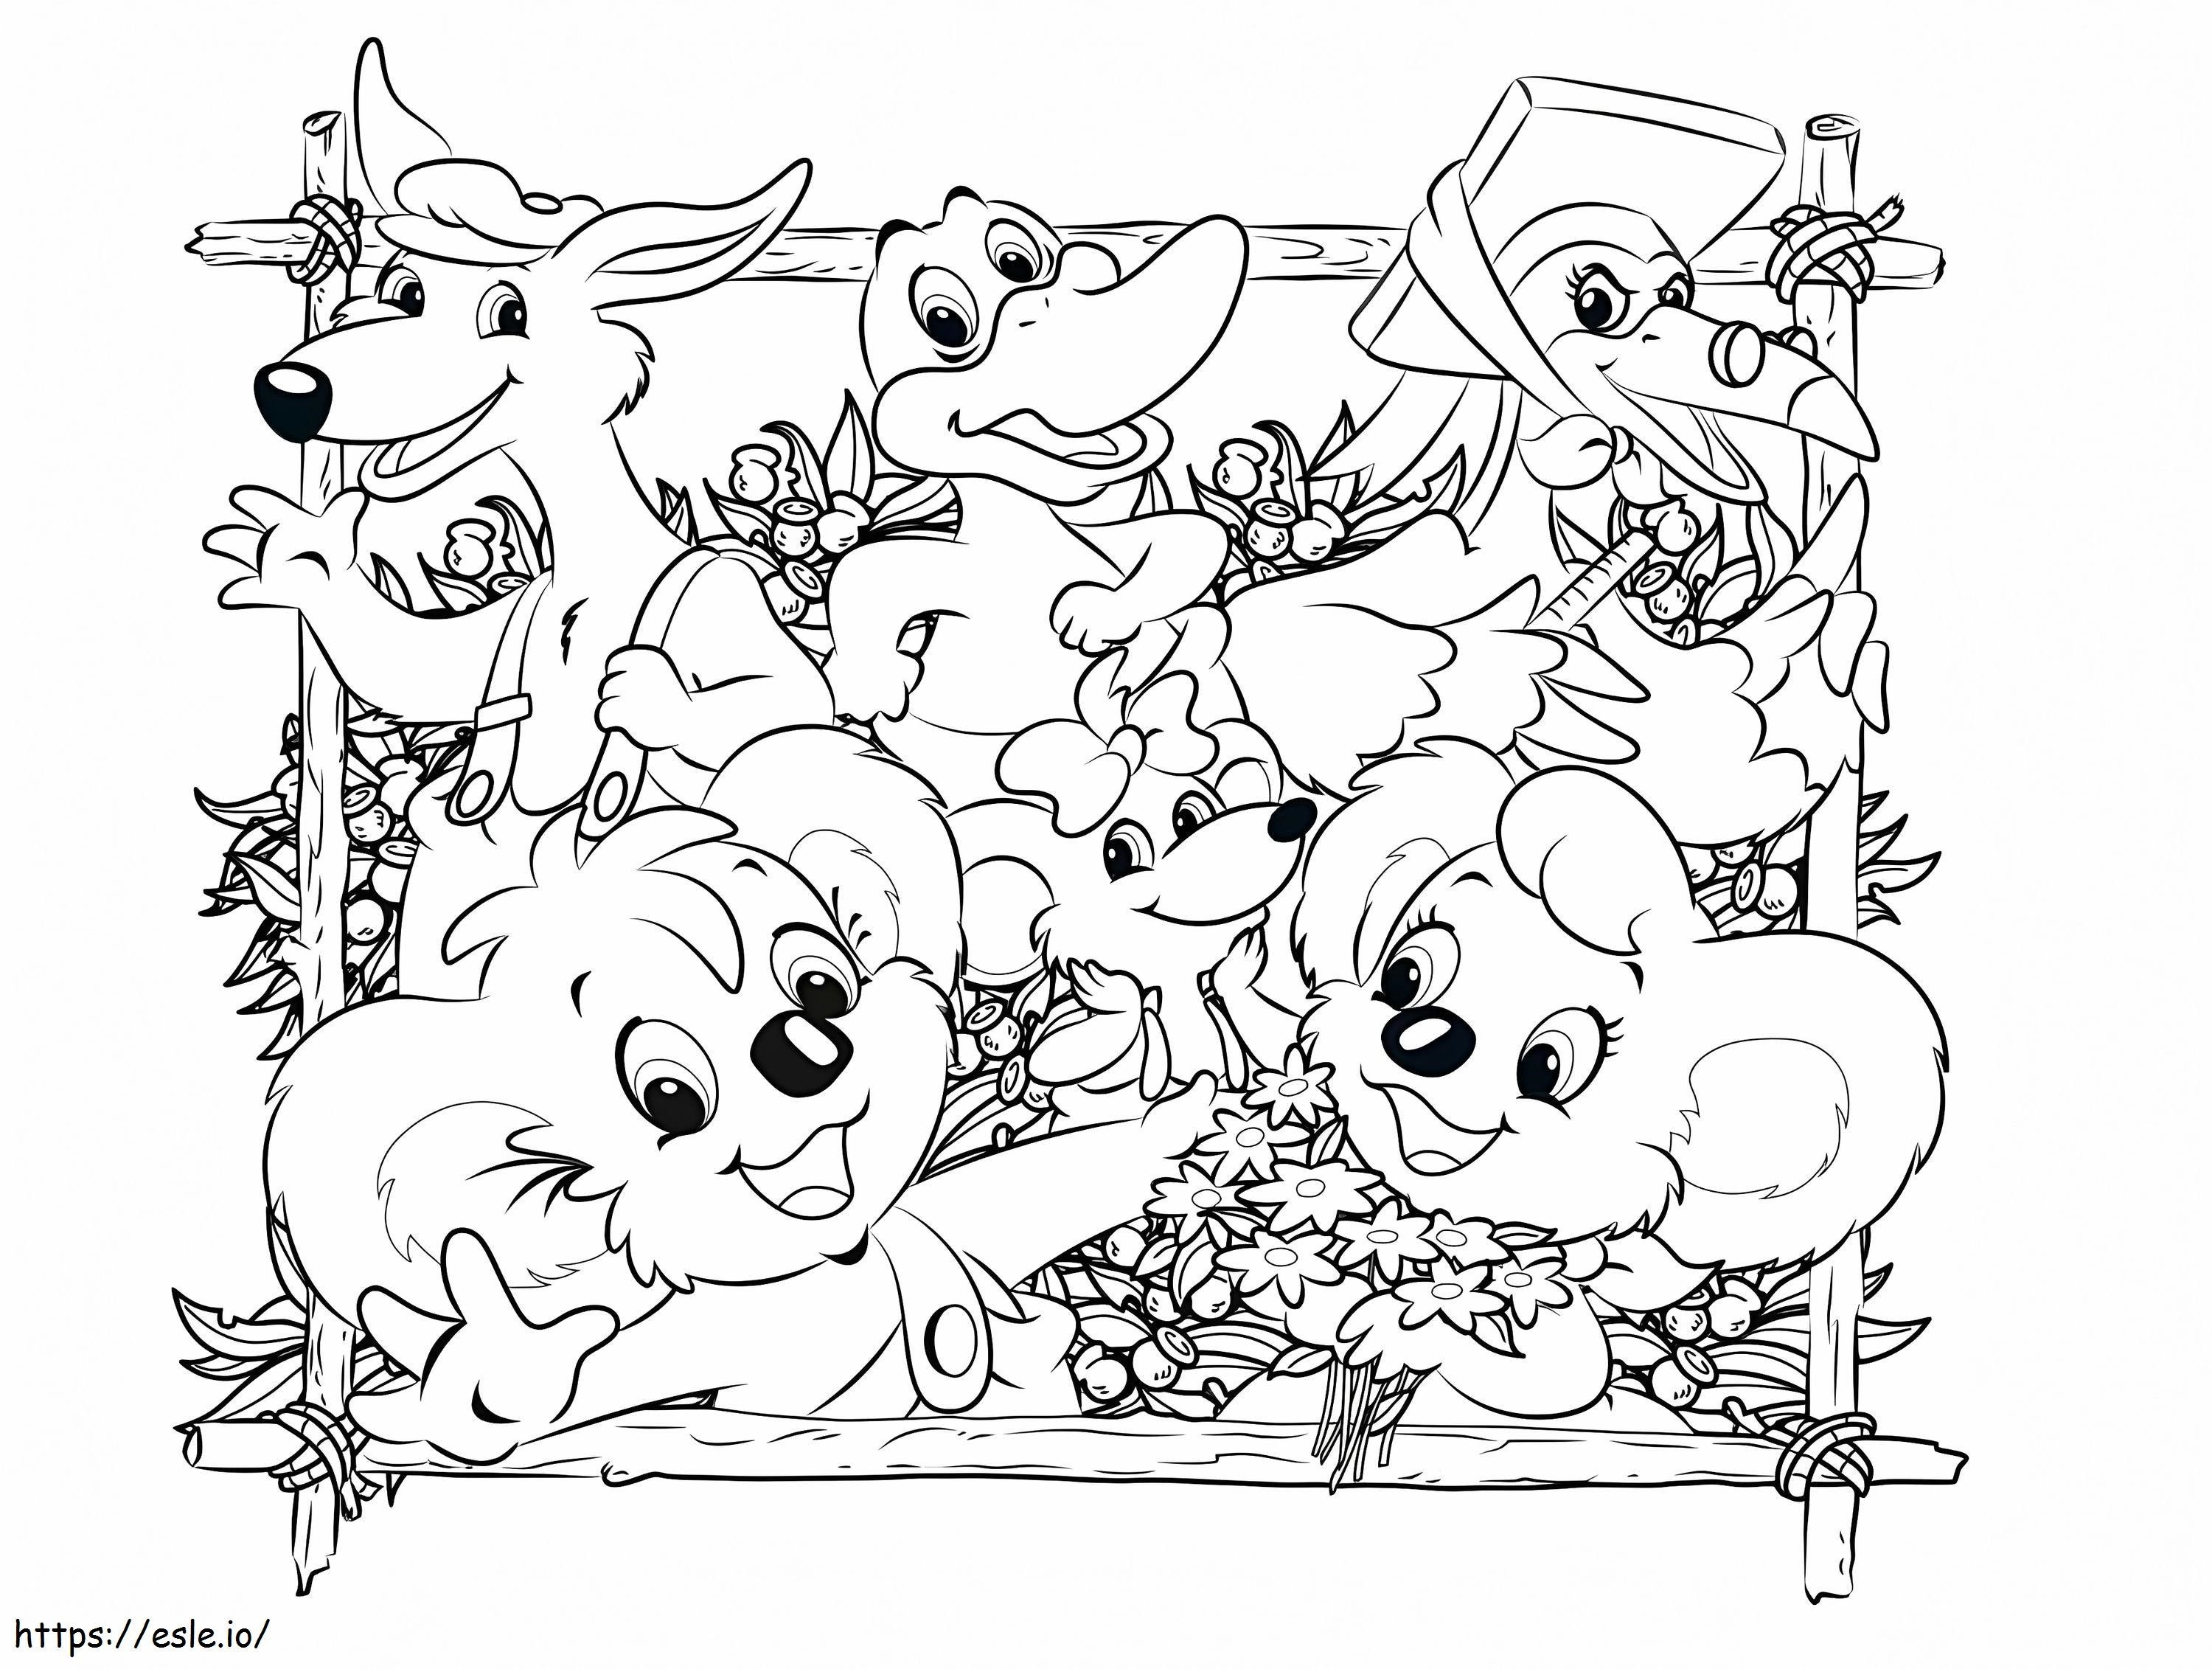 Blinky Bill Characters 4 coloring page